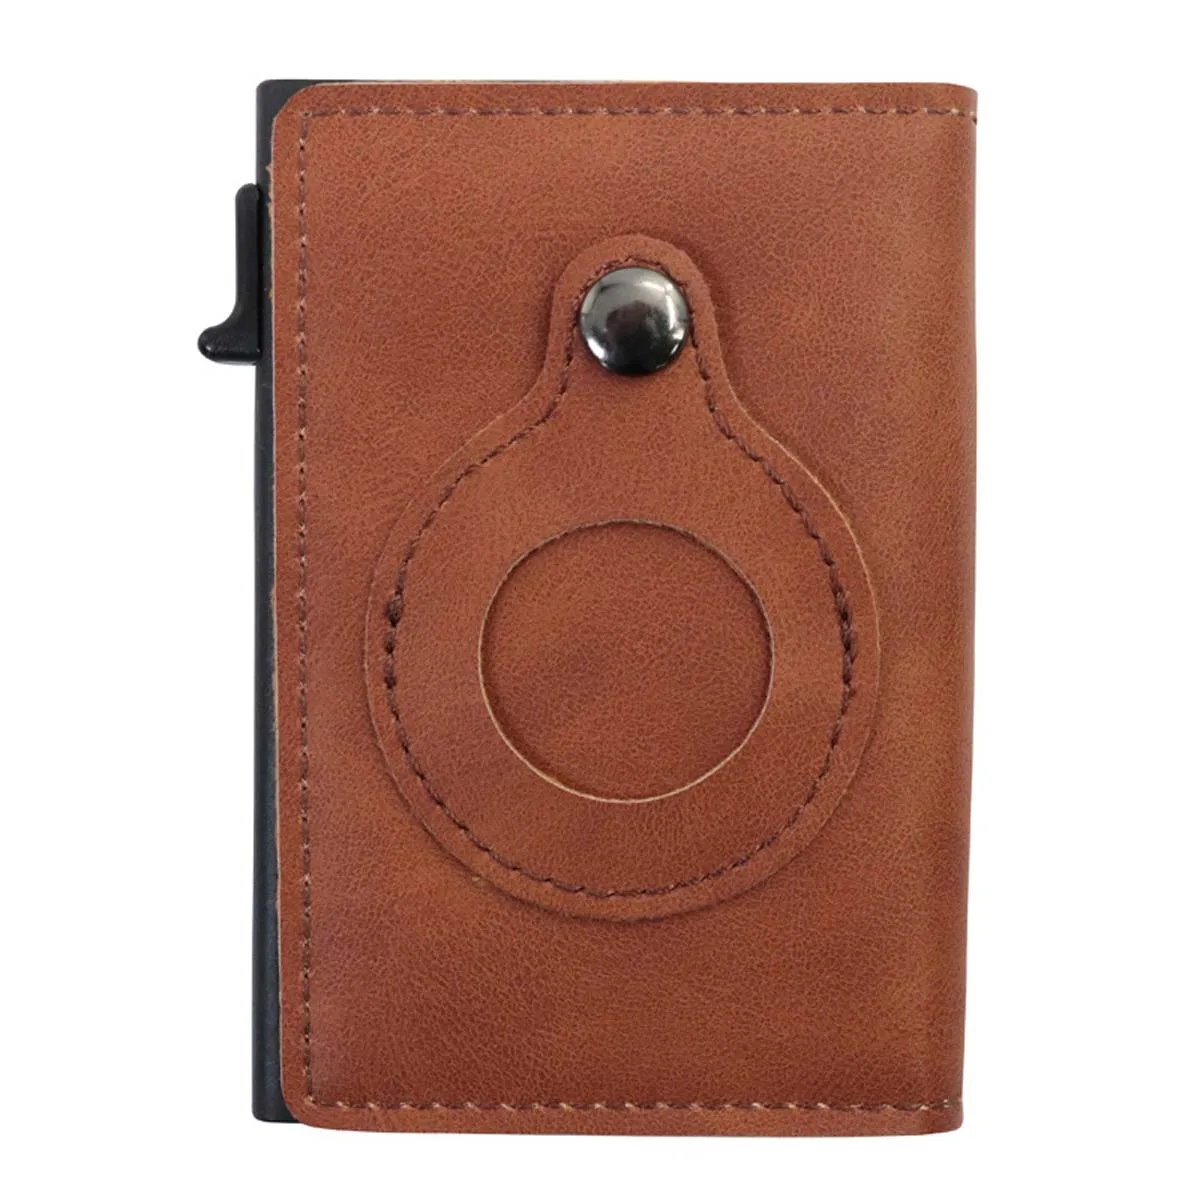 Cattlehide Pop-out RFID Card Holder Slim Aluminum Anti-theft Brush Leather Wallet ID Card Blocking Protect Travel Cardholder